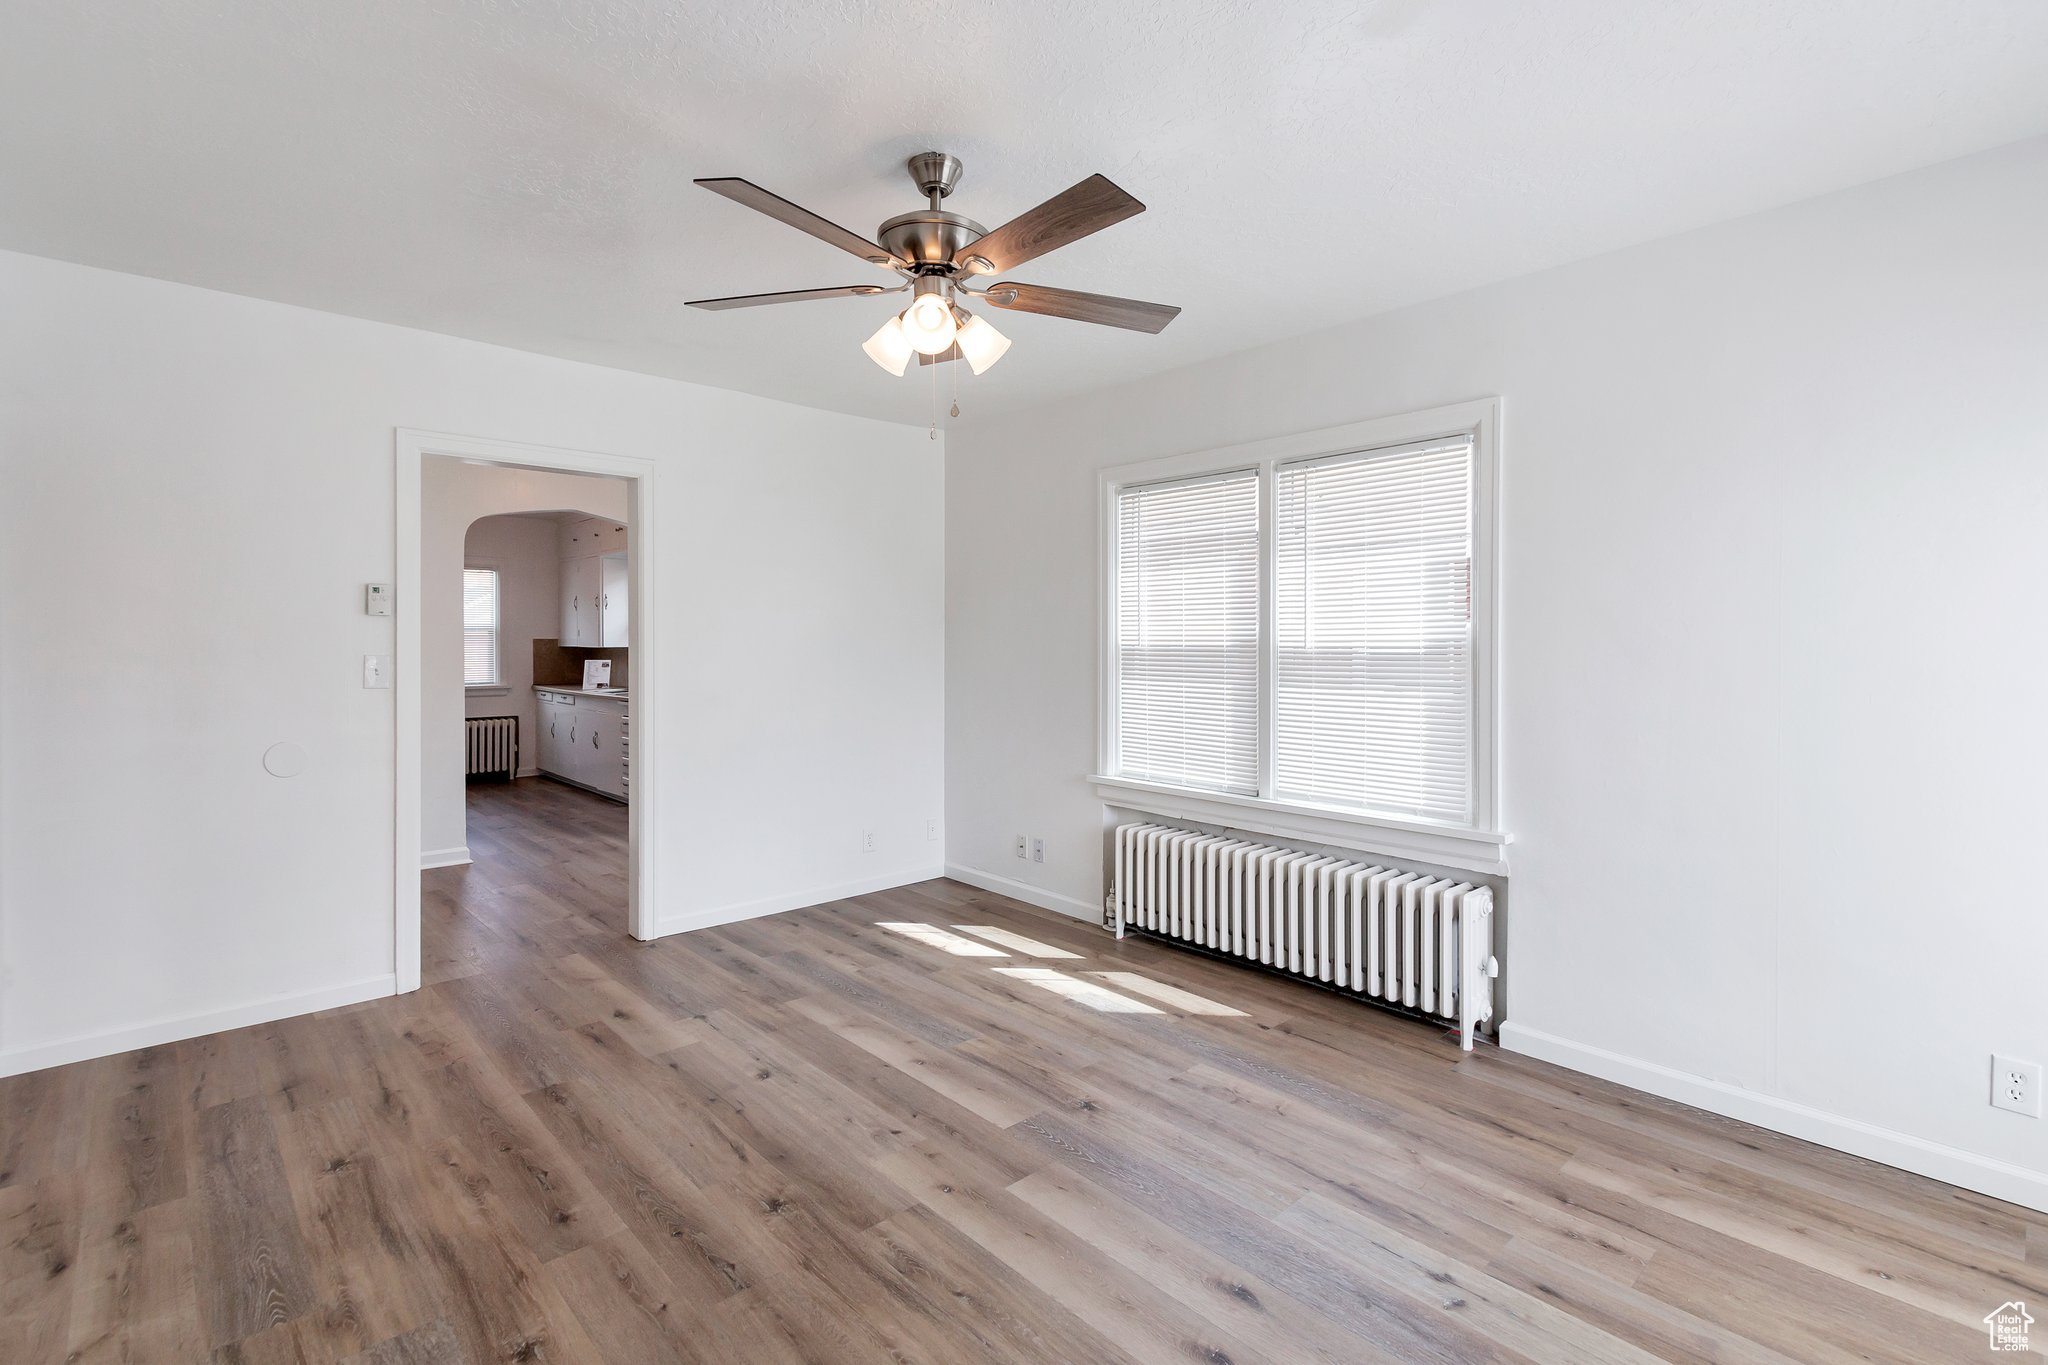 Unfurnished room featuring wood-type flooring, ceiling fan, and radiator heating unit